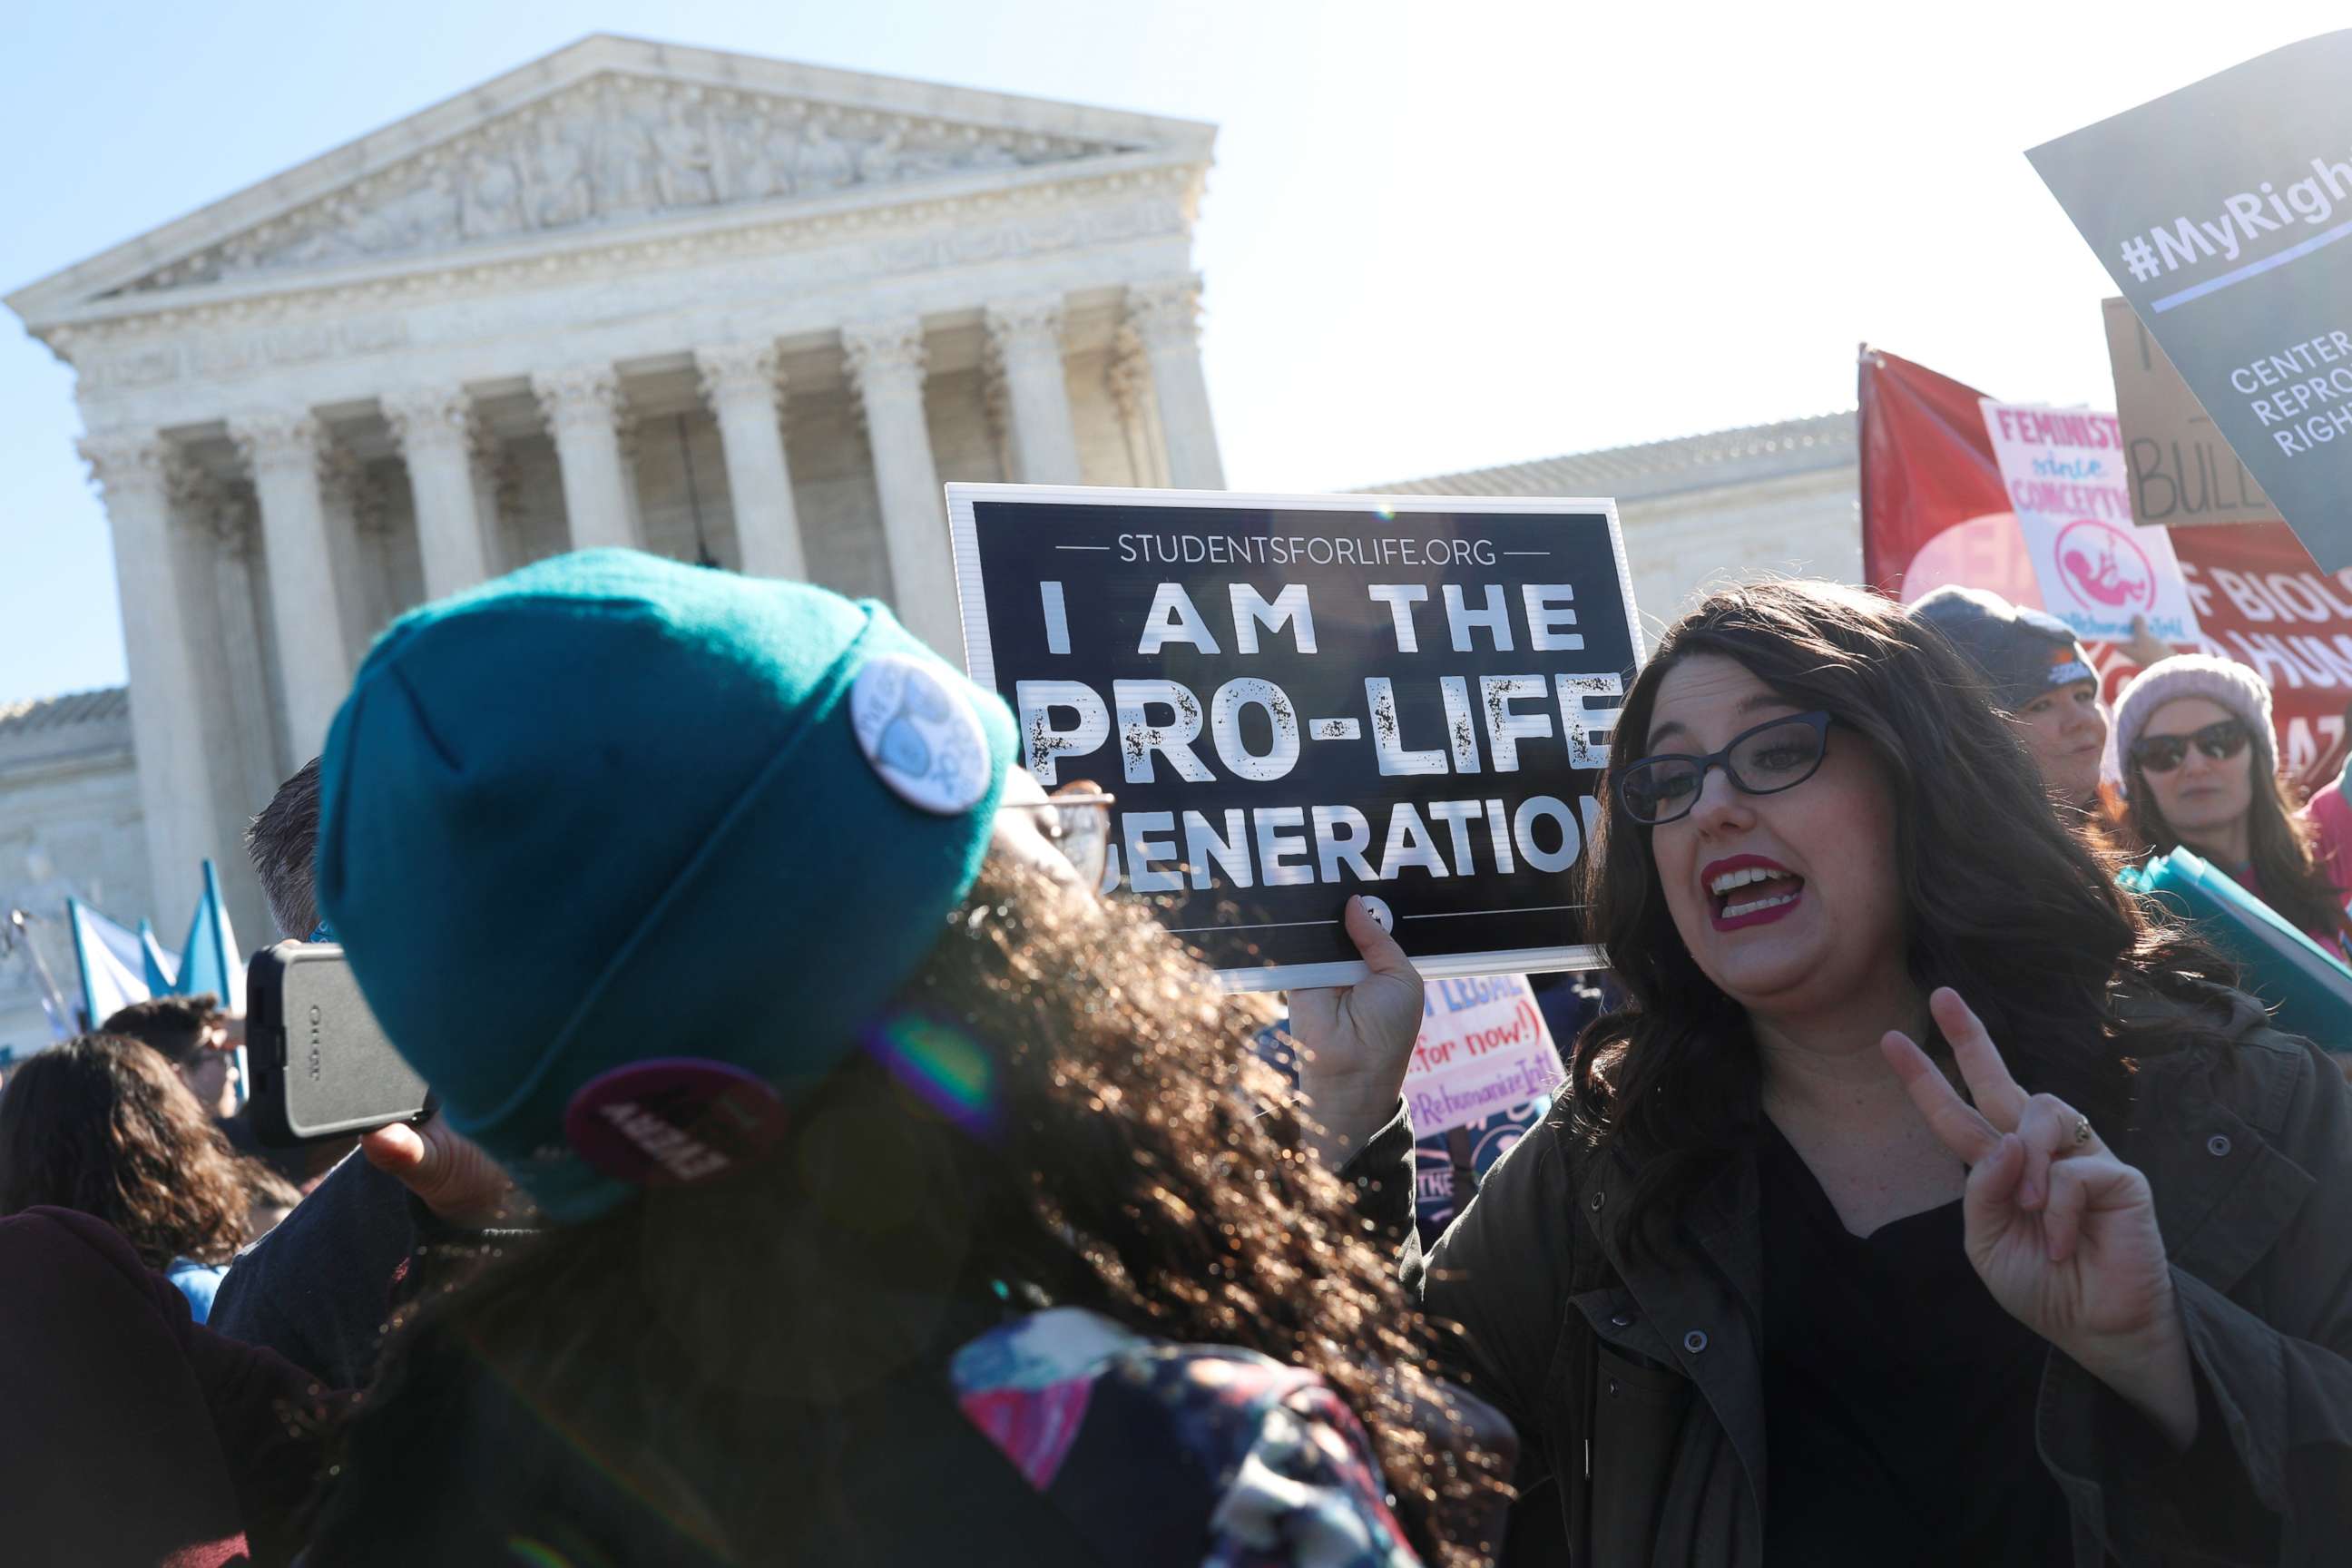 PHOTO: Pro-life and pro-choice demonstrators argue outside of the Supreme Court as justices hear a major abortion case on the legality of a Republican-backed Louisiana law that imposes restrictions on abortion doctors, in Washington, March 4, 2020.